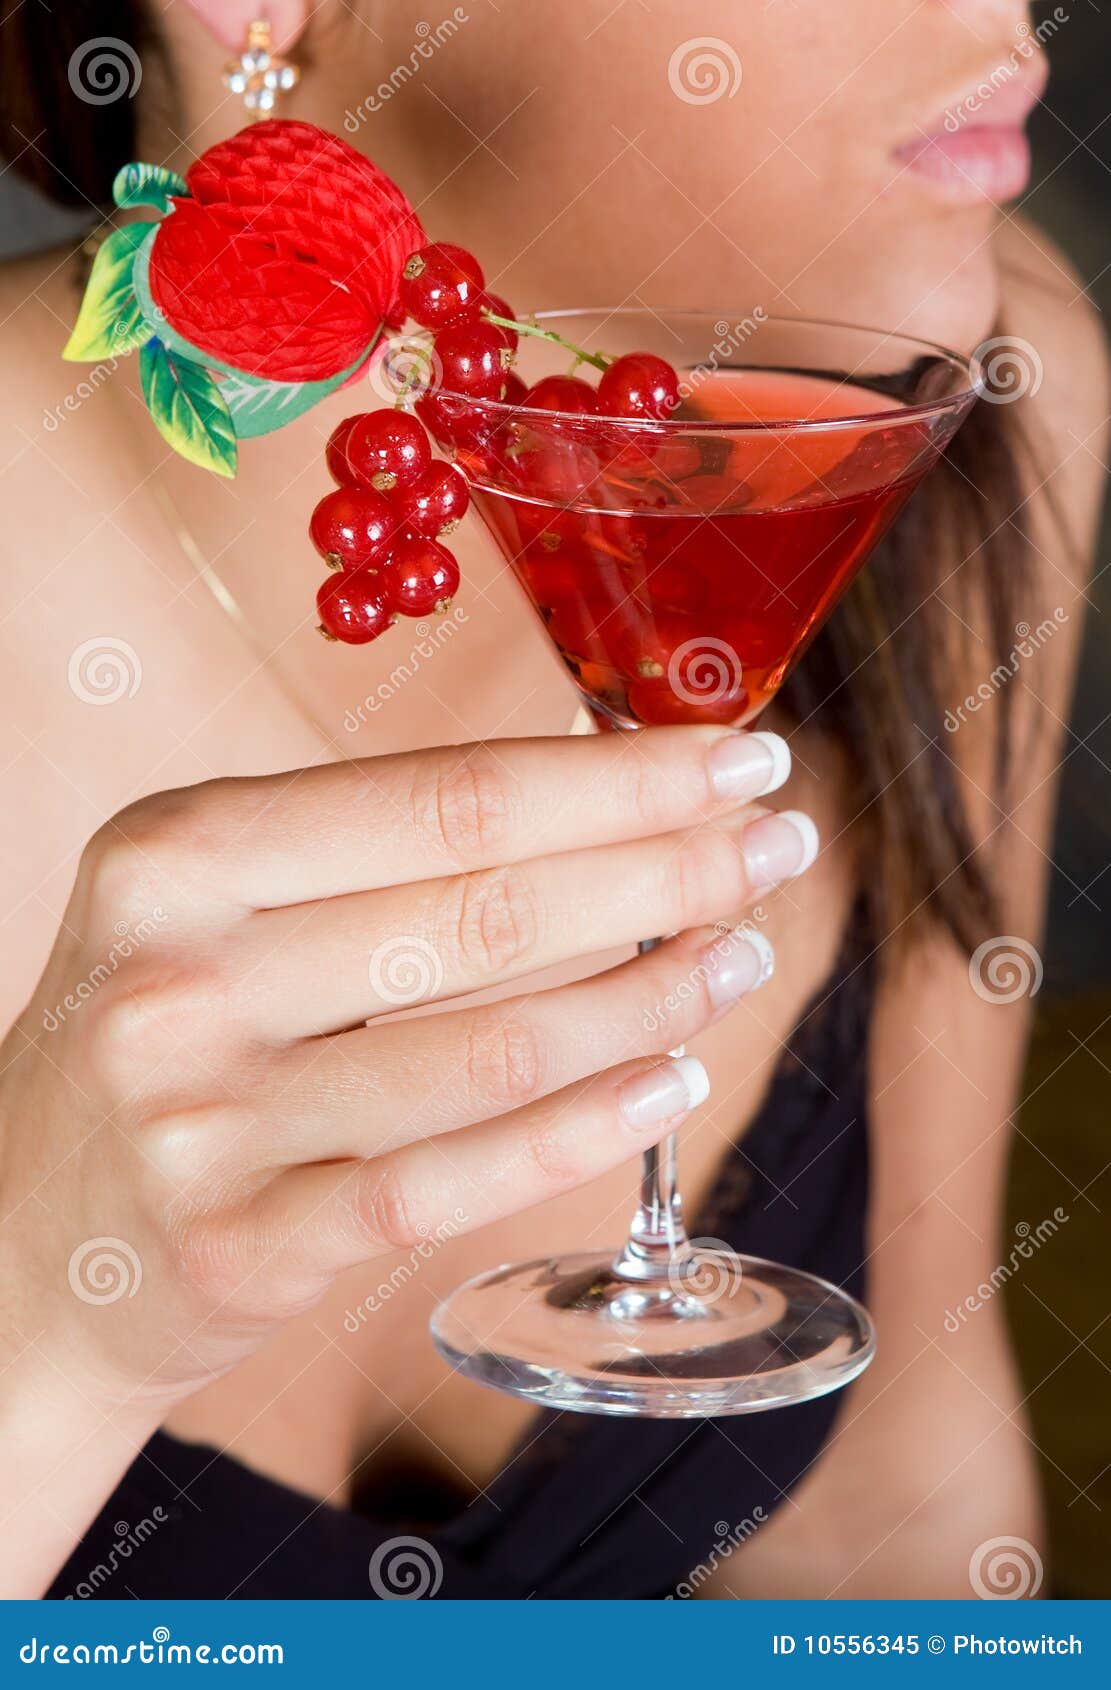 Red berries in a cocktail. Young woman holding a cocktail with red berries